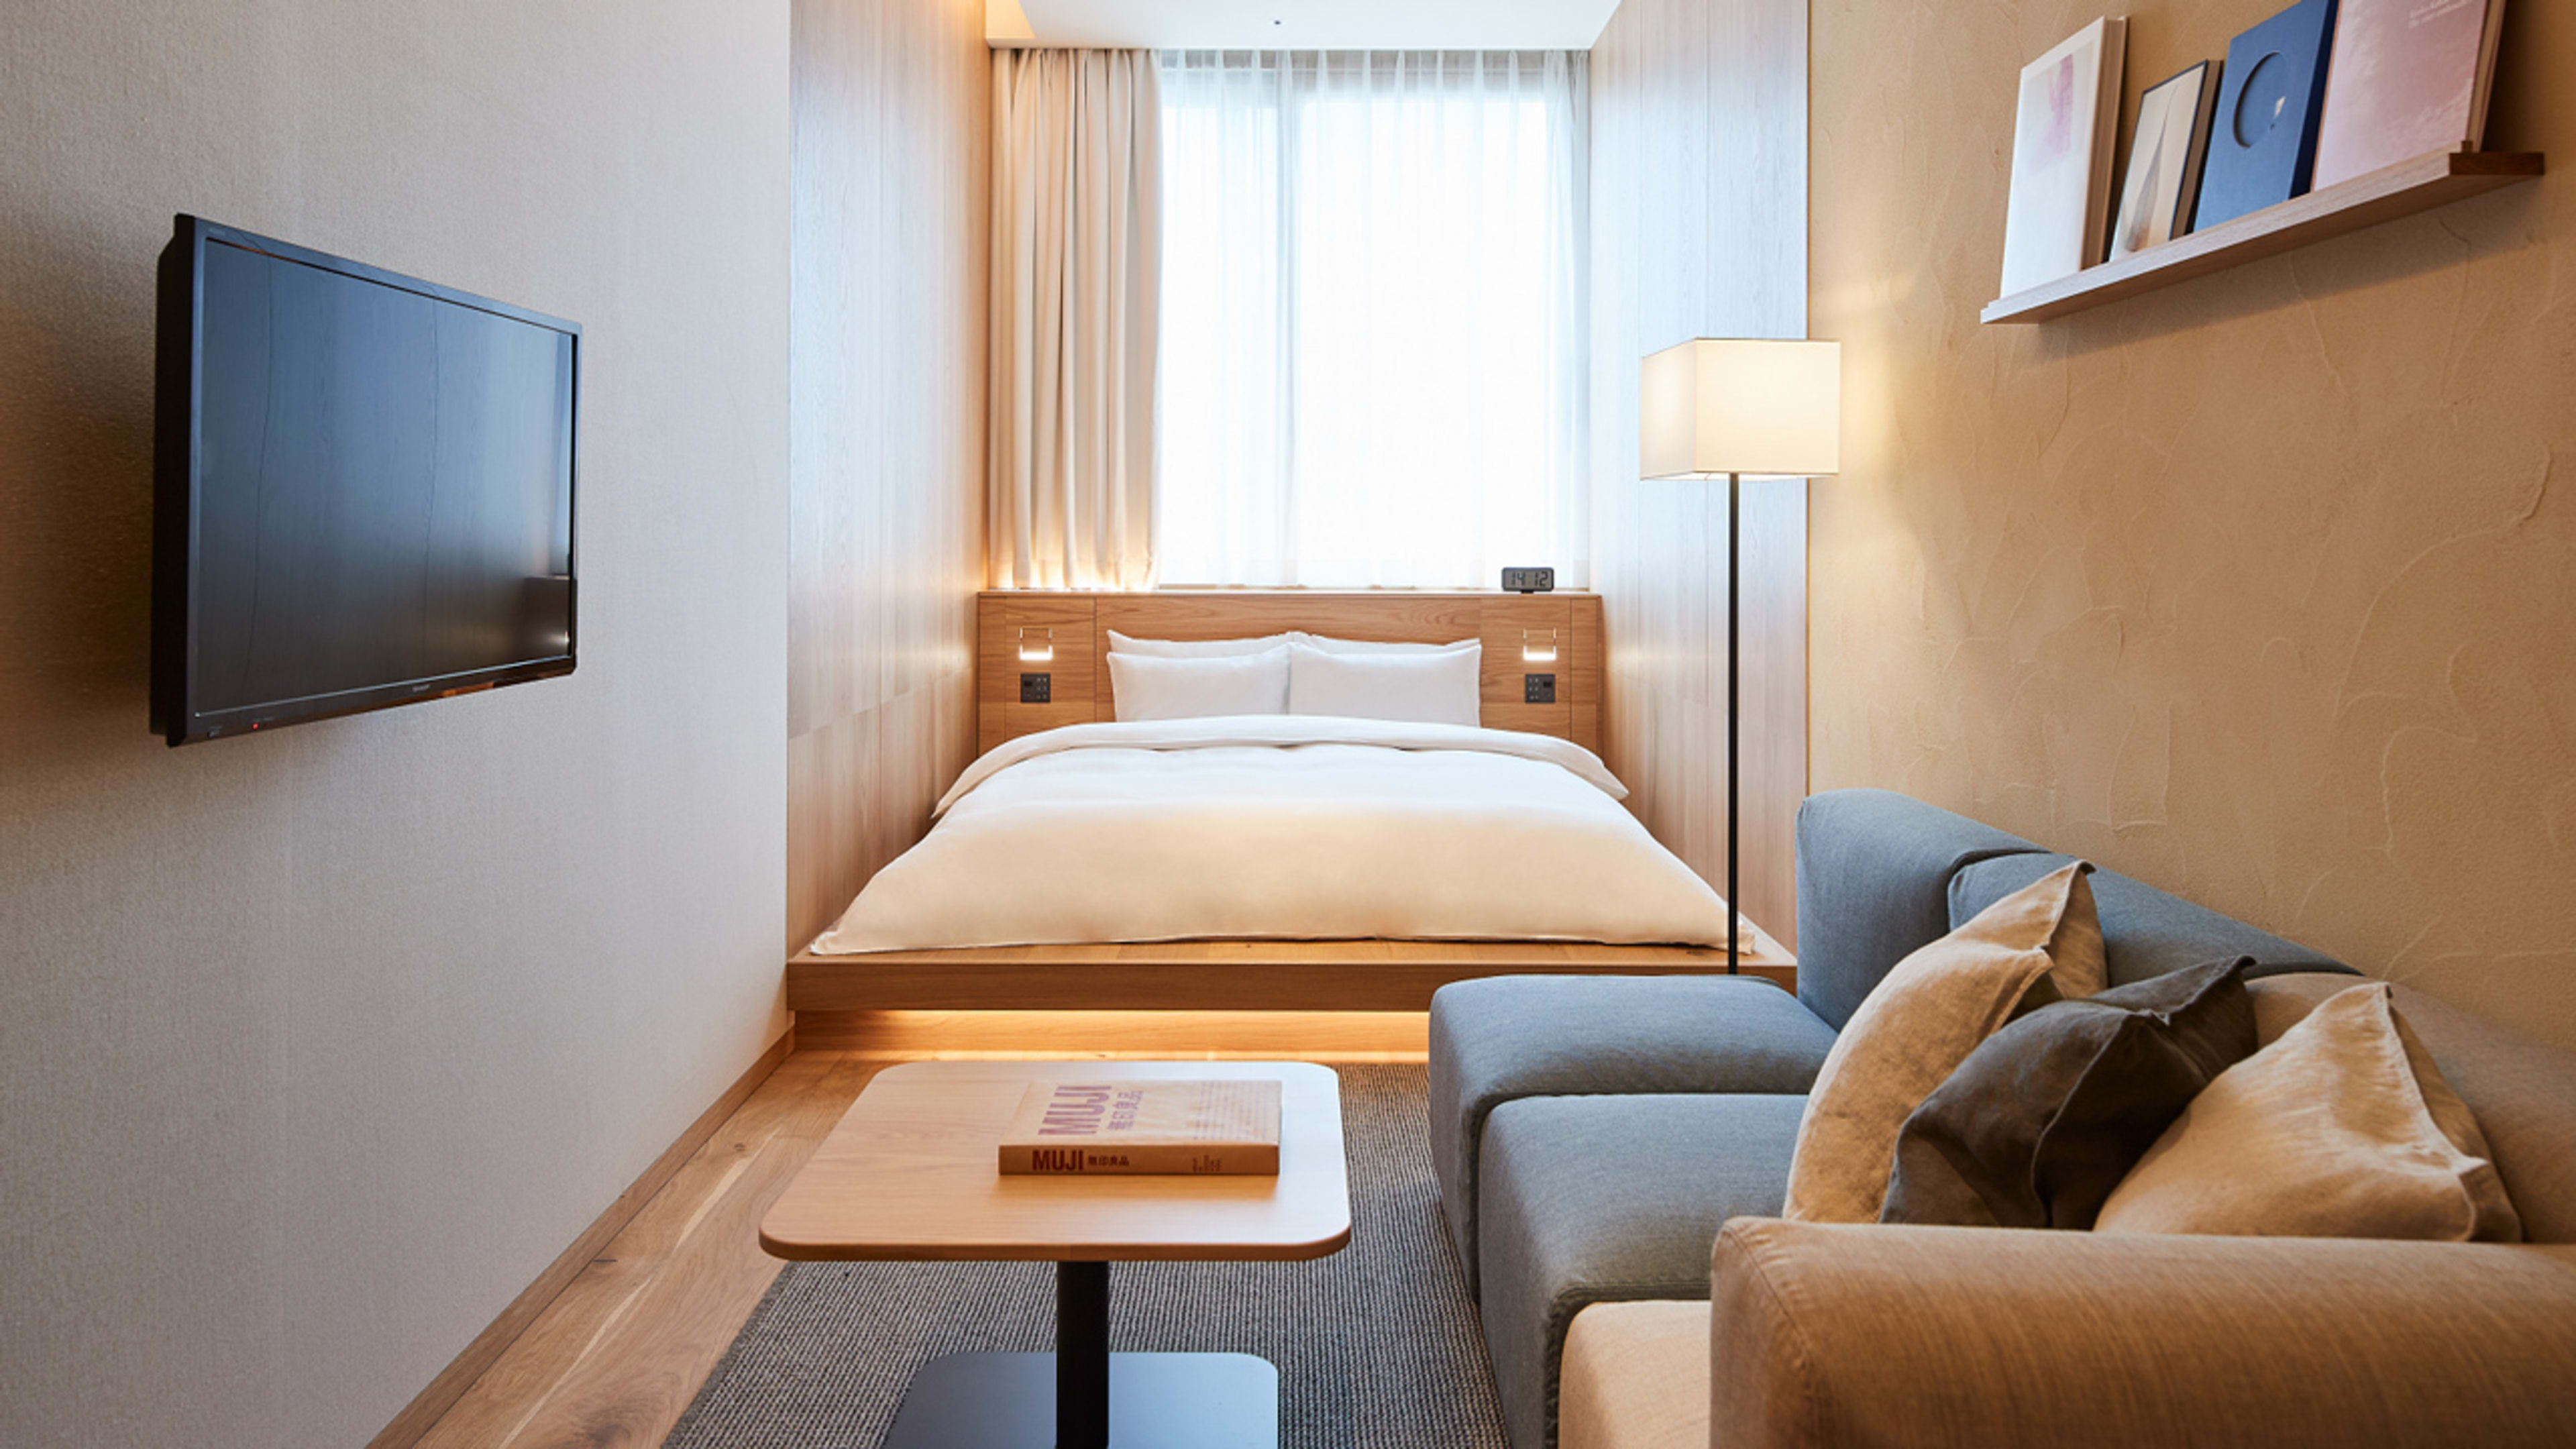 Muji’s new hotel is the greatest ad for Muji yet